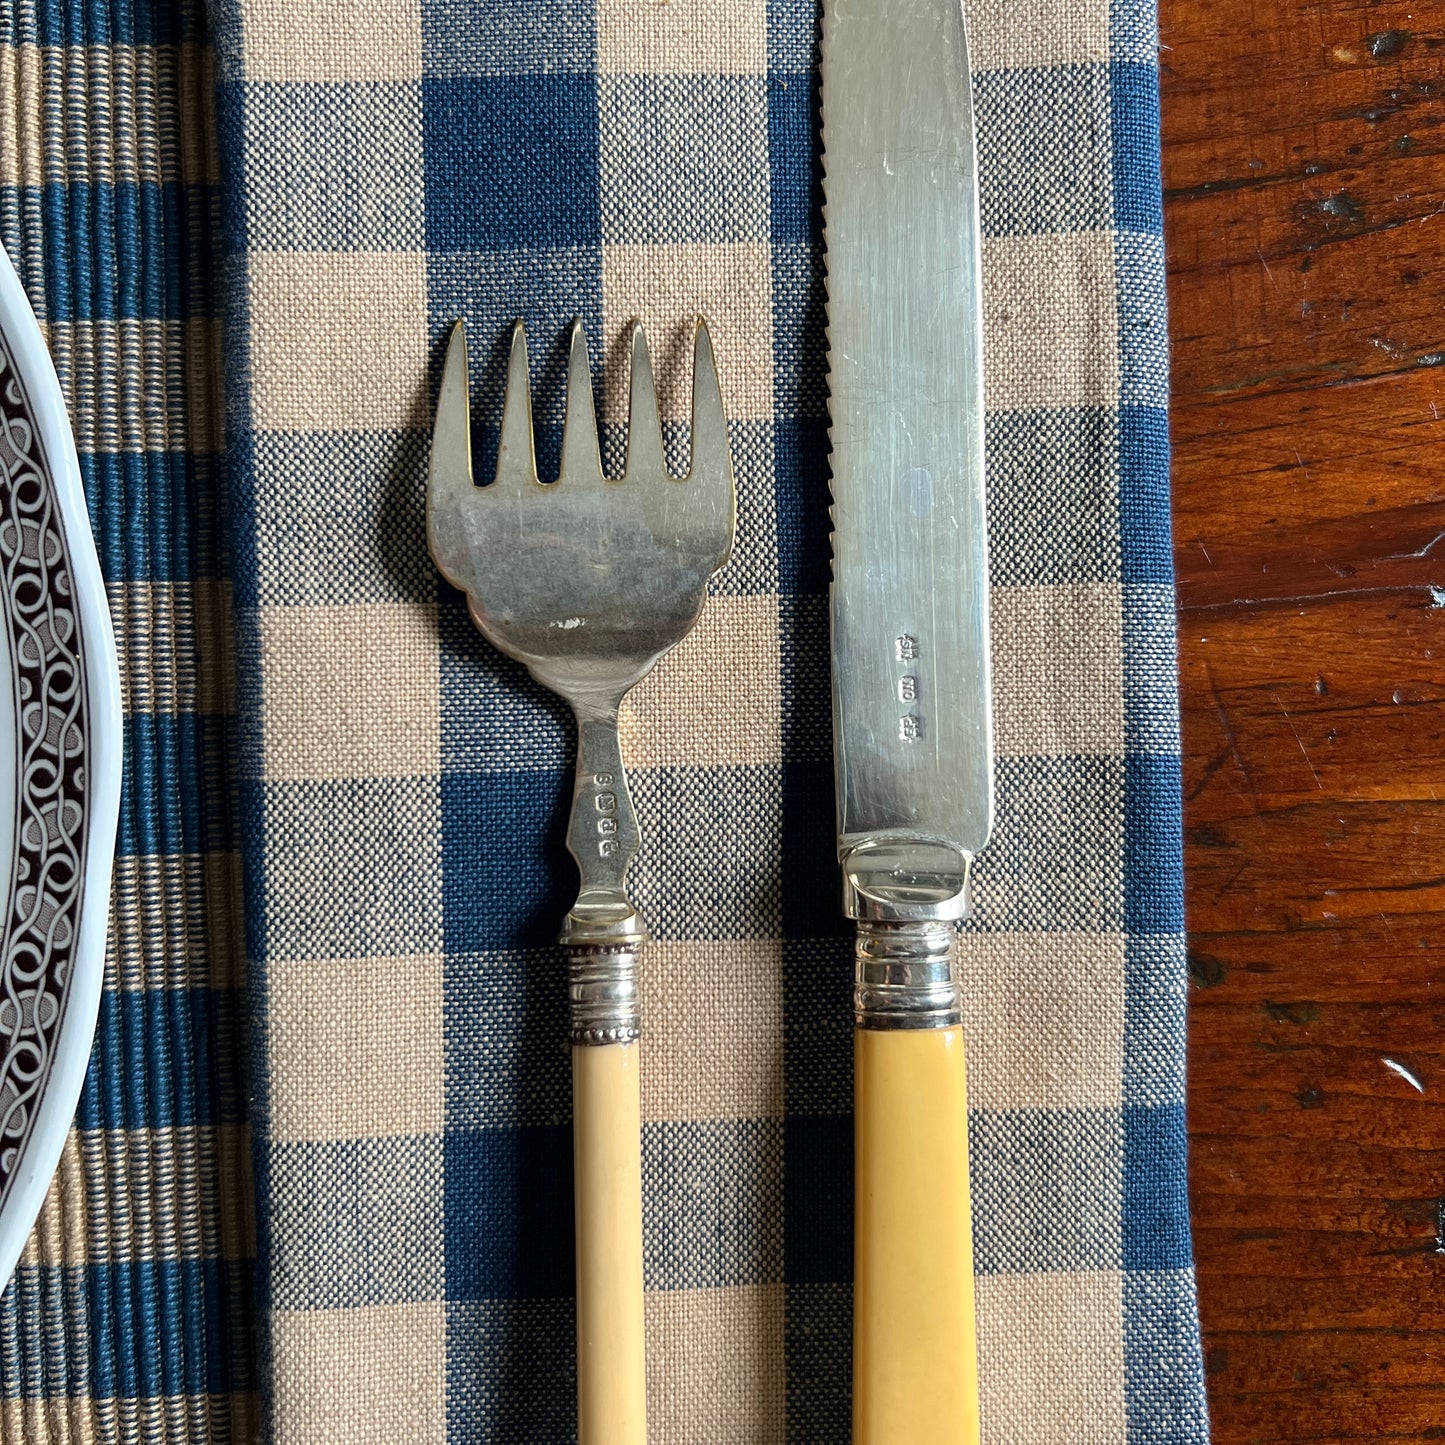 Individual Victorian Fish Serving Fork and Knife Set